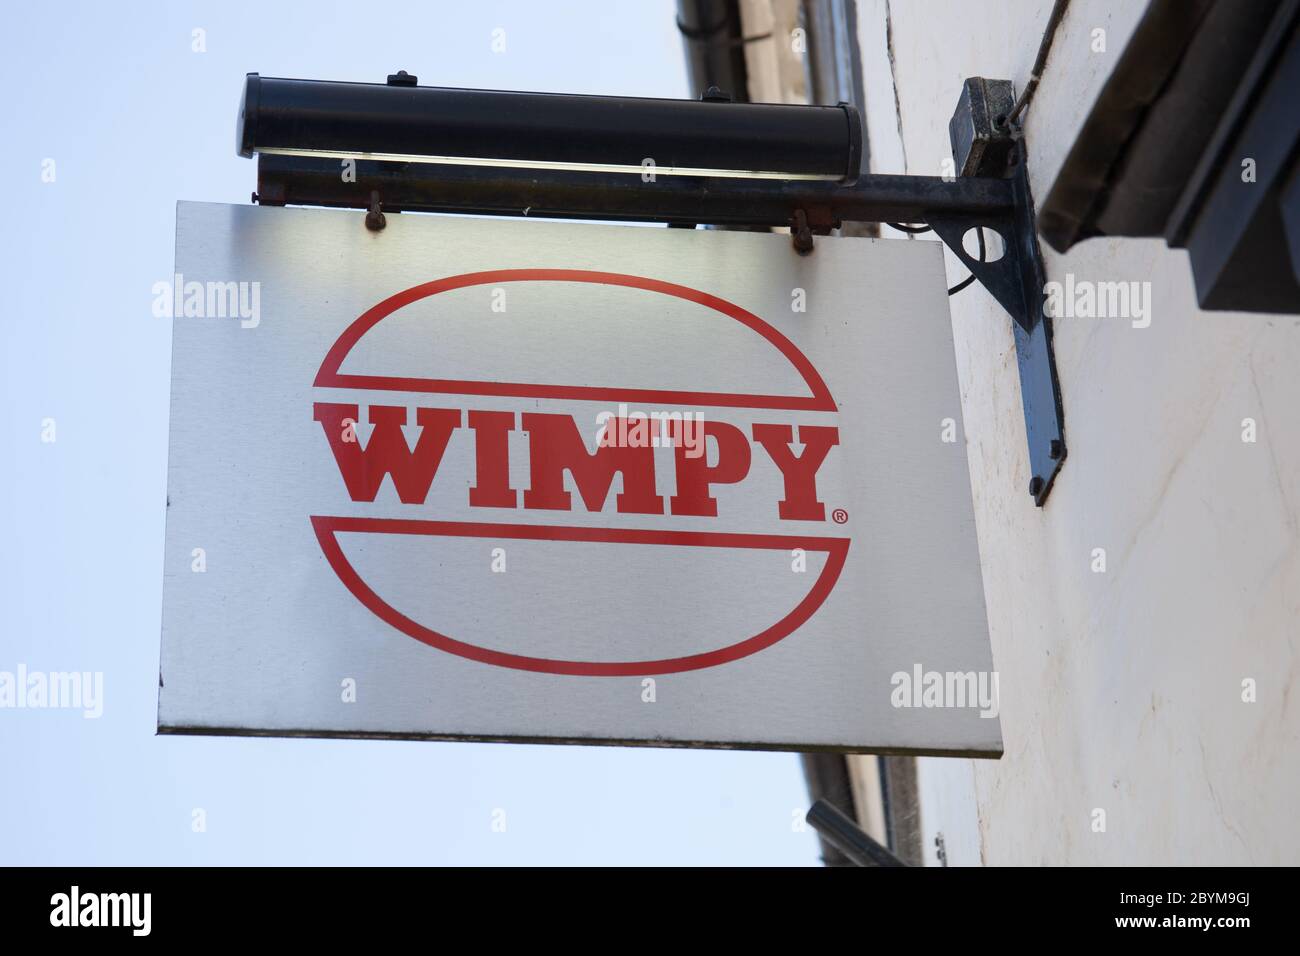 The Wimpy restaurant sign hanging from a wall in the UK Stock Photo